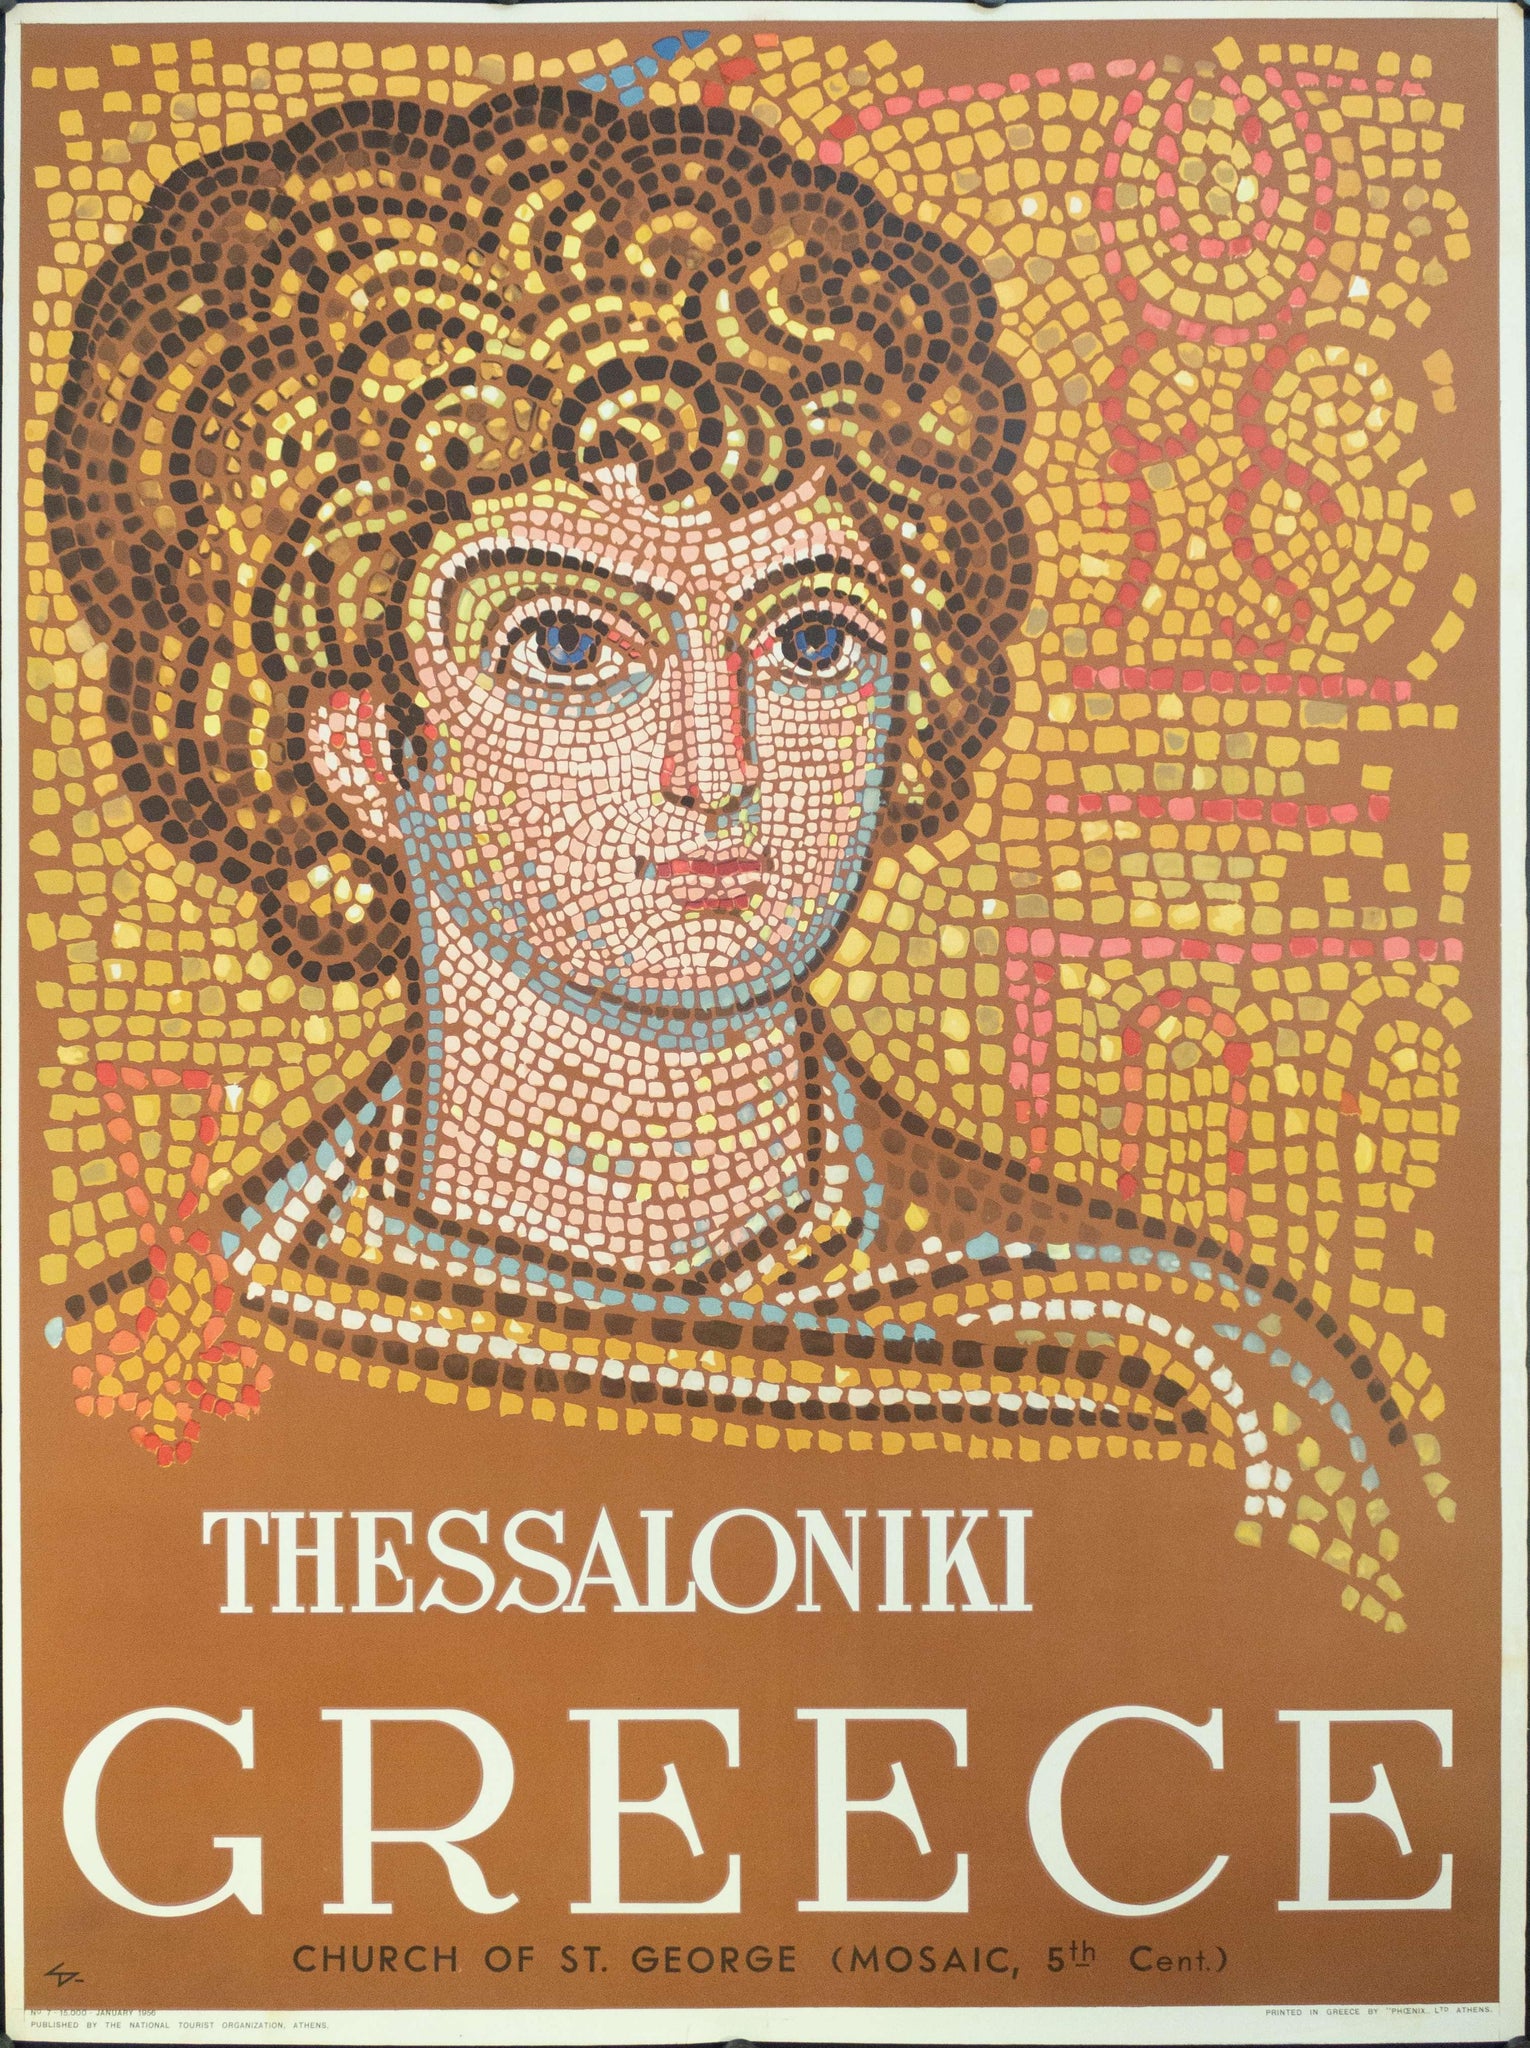 1956 Thessaloniki Greece | Church of St. George (Mosaic, 5th Century) - Golden Age Posters